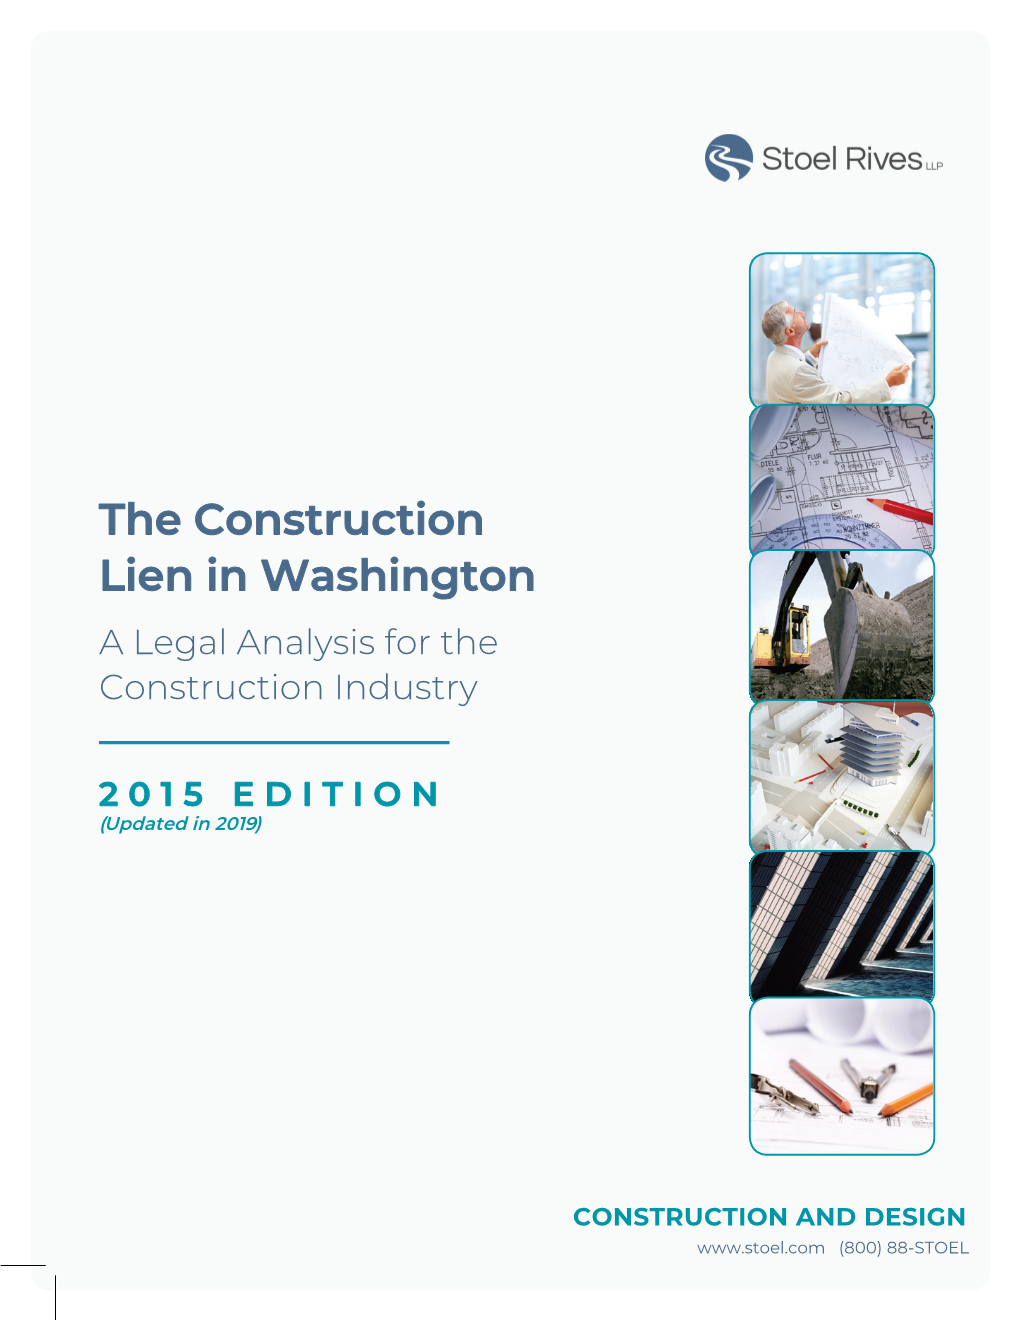 The Construction Lien in Washington a Legal Analysis for the Construction Industry